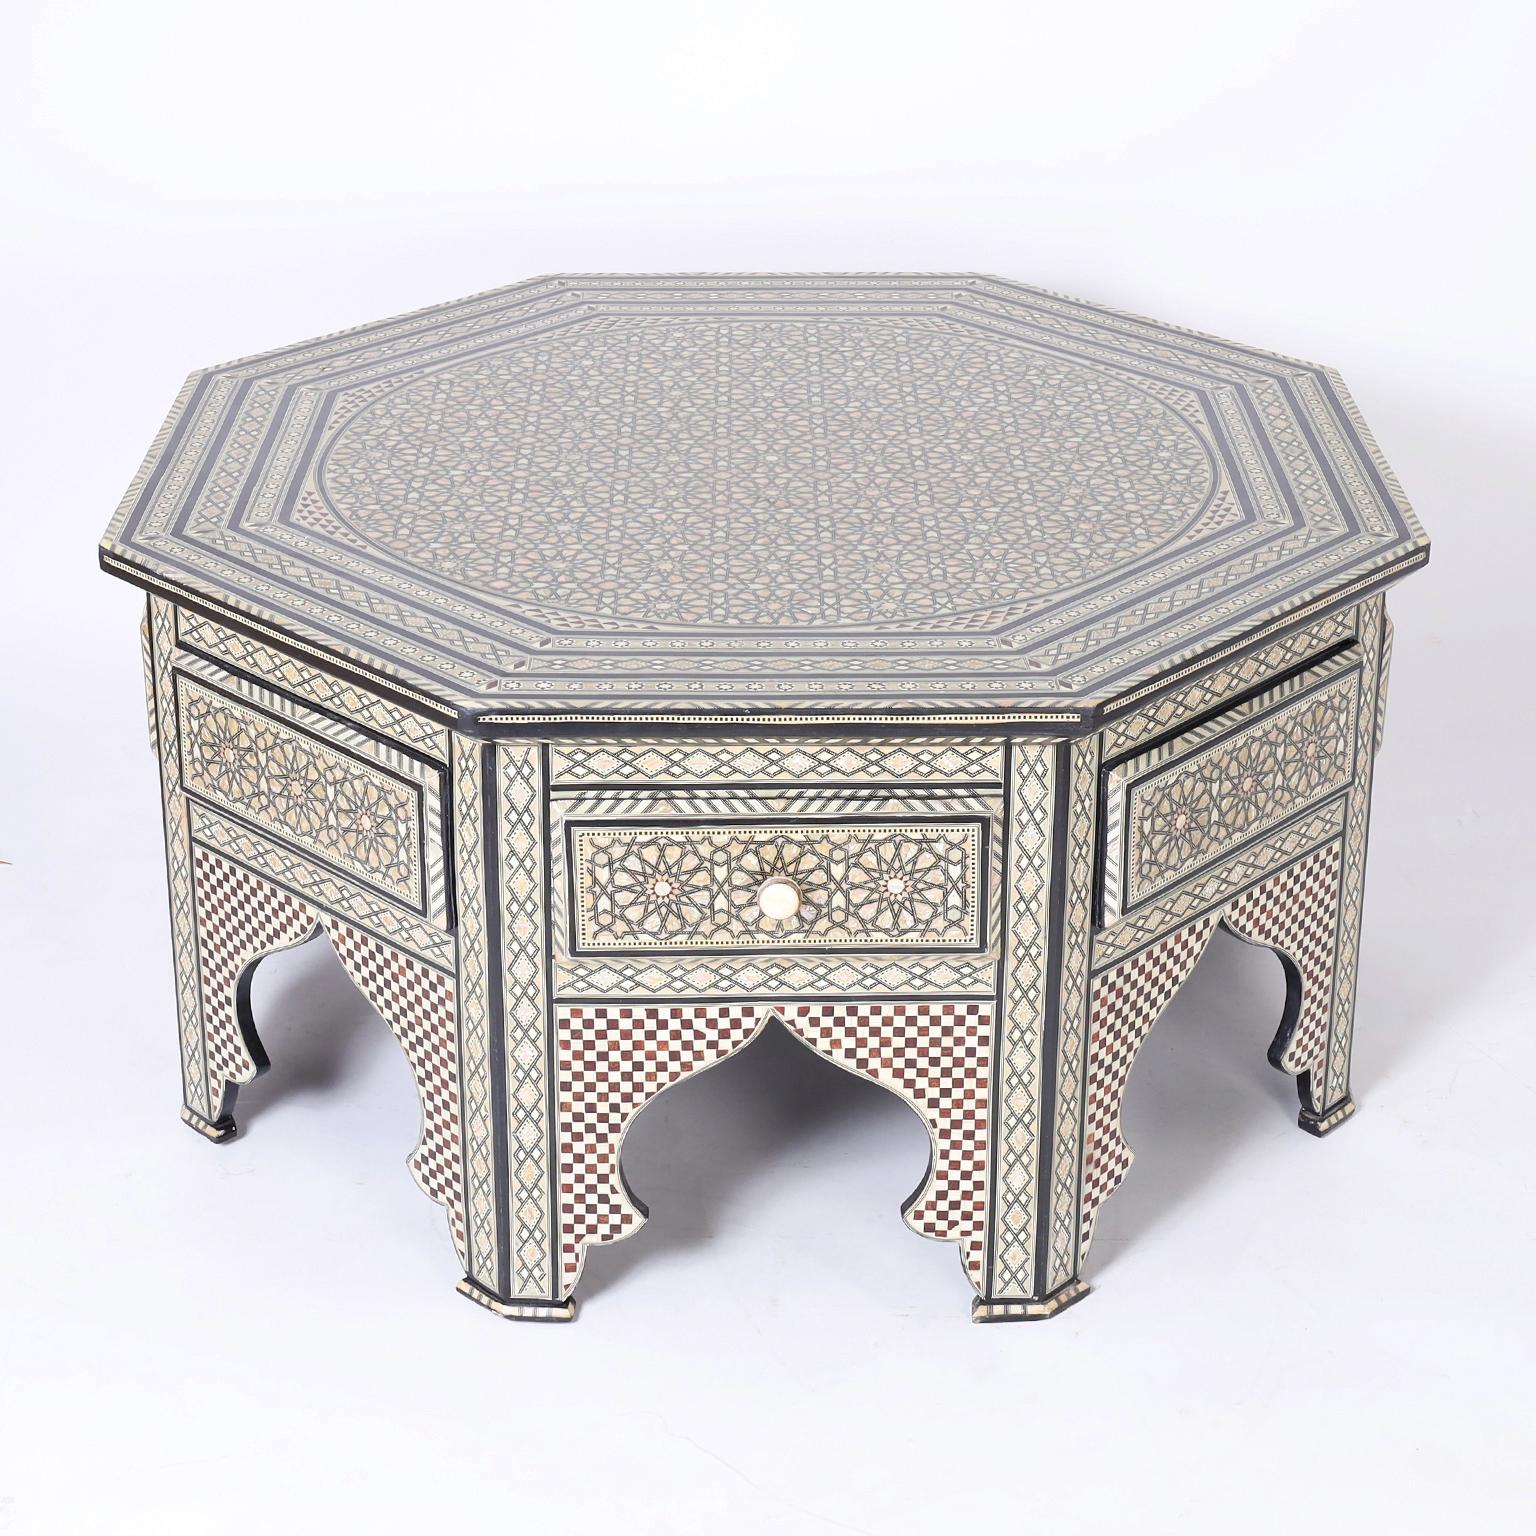 Vintage Moorish style coffee table with an octagon form featuring ambitious inlaid designs in mother of pearl, bone, ebony and mahogany, four drawers and a base with architectural arches.